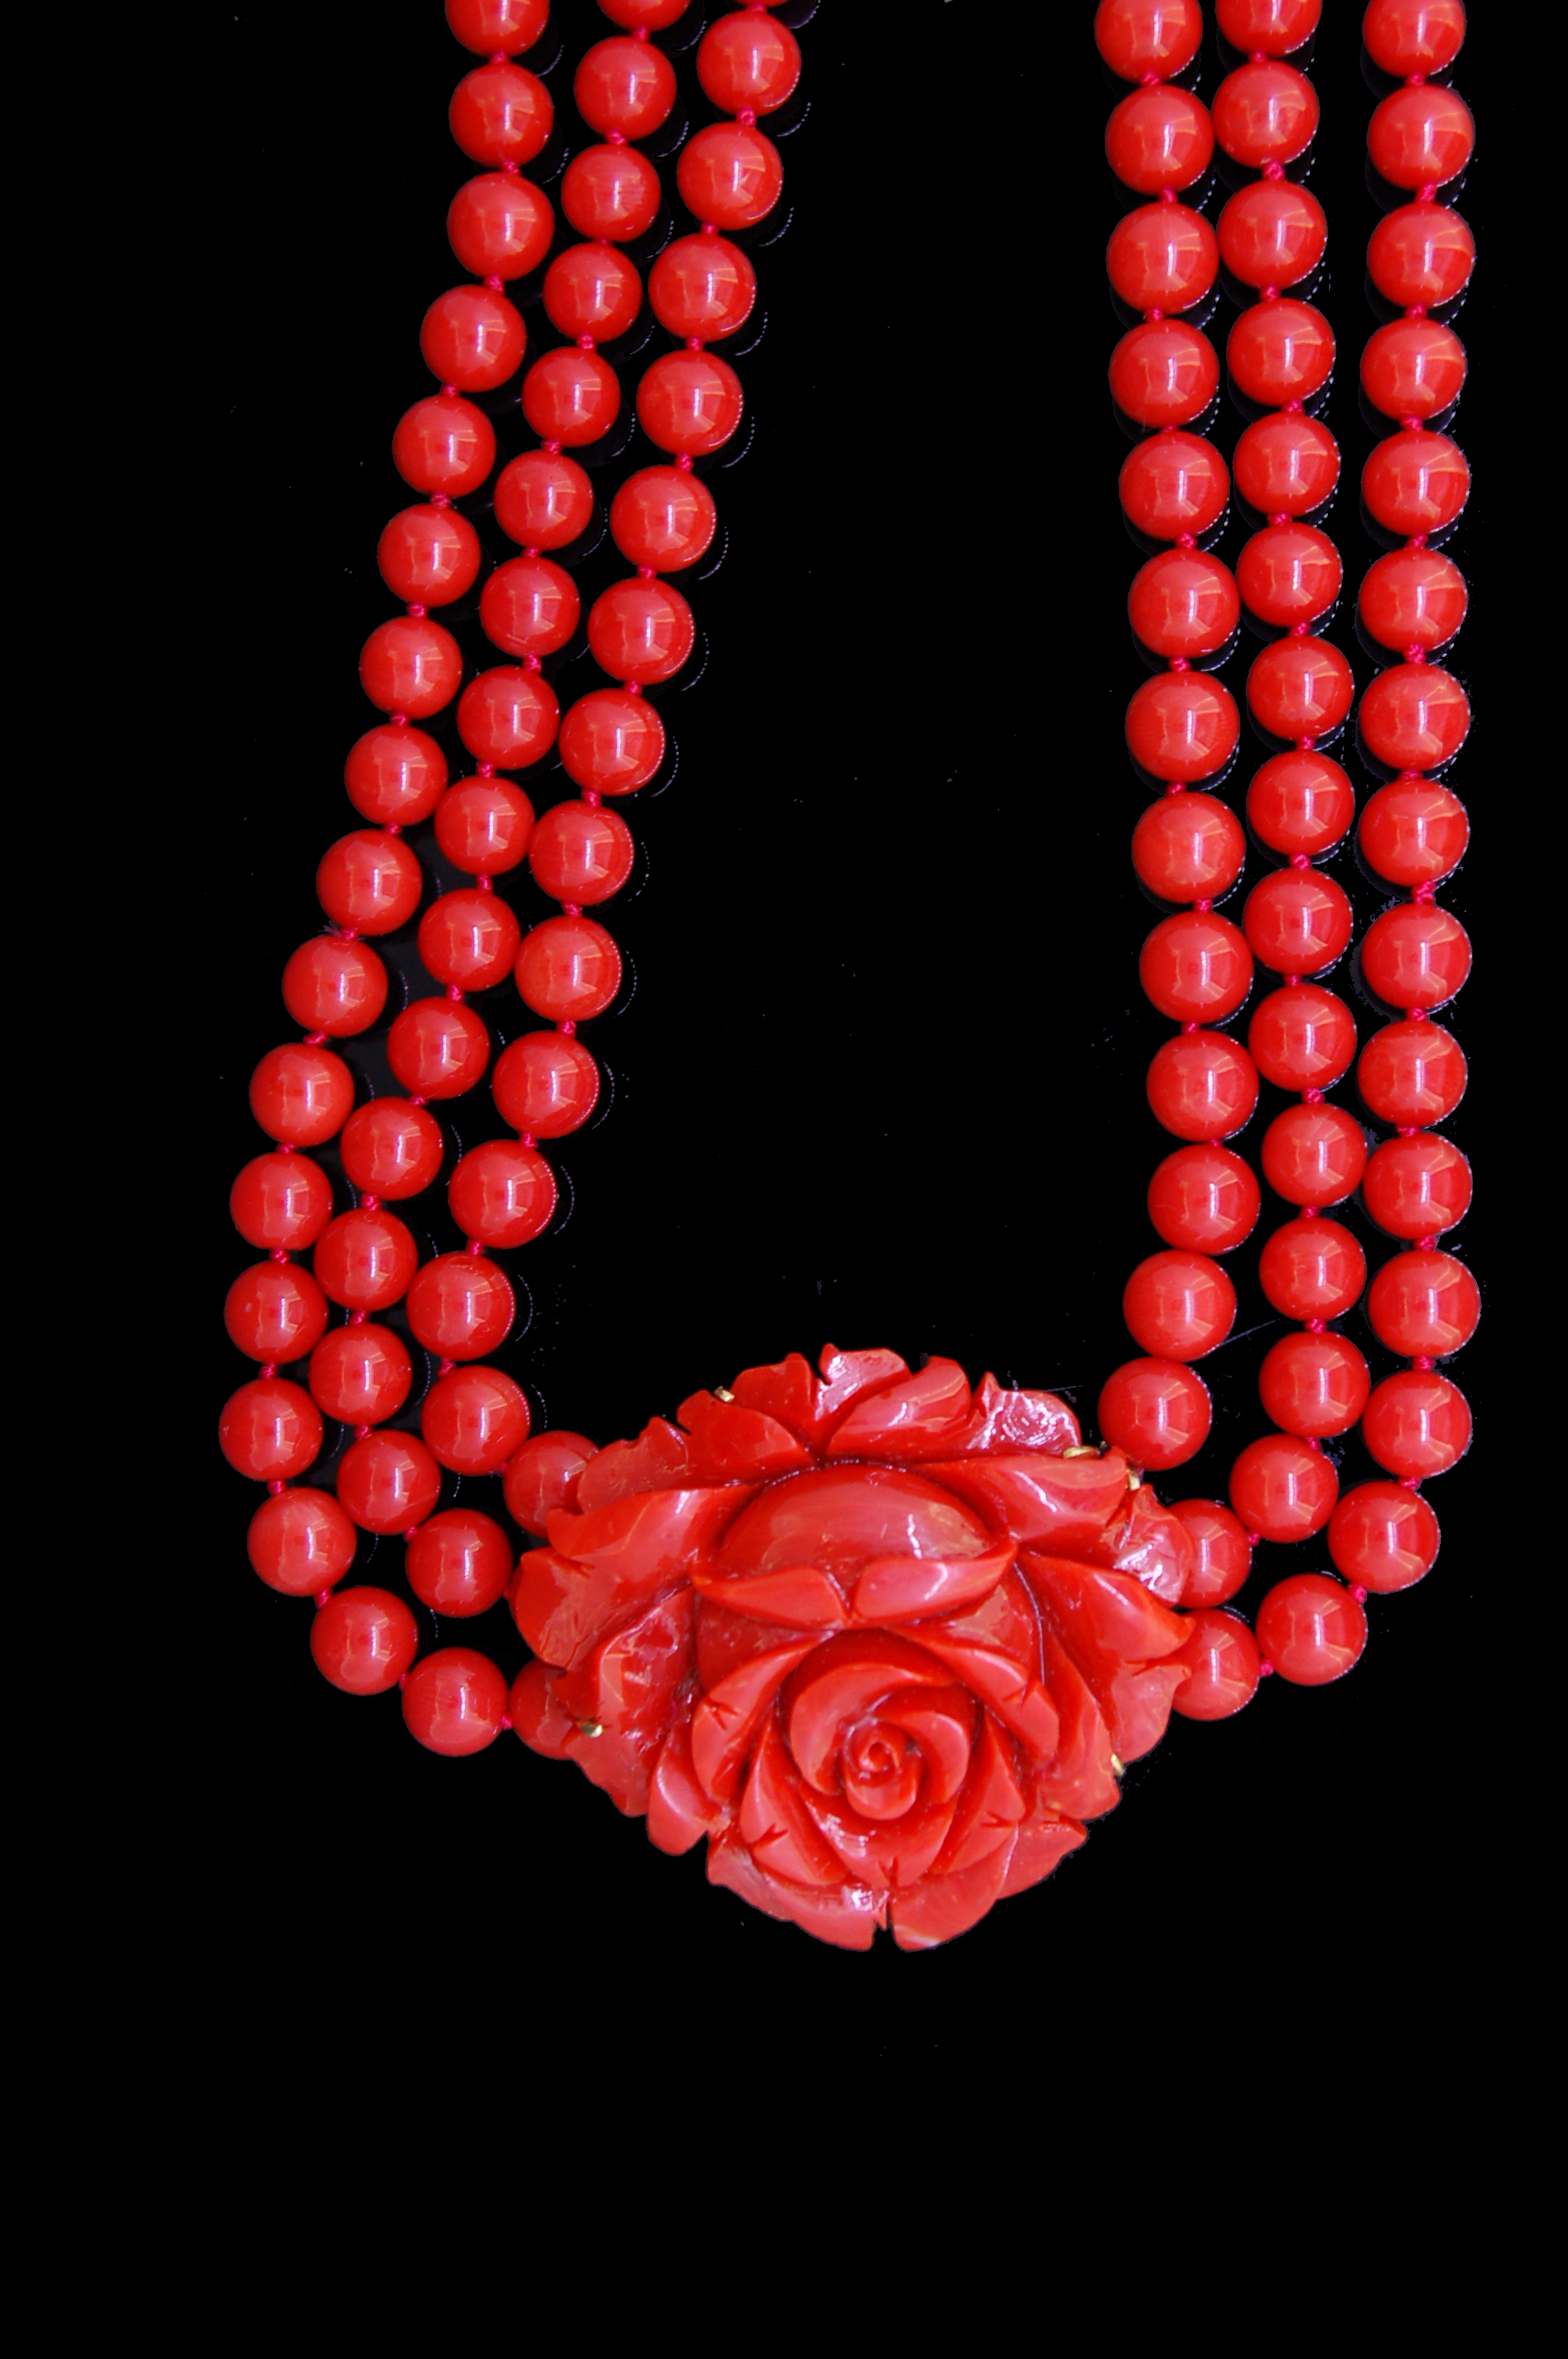 VAN CLEEF & ARPELS, IMPORTANT CARVED CORAL AND CORAL NECKLACE - Image 2 of 2